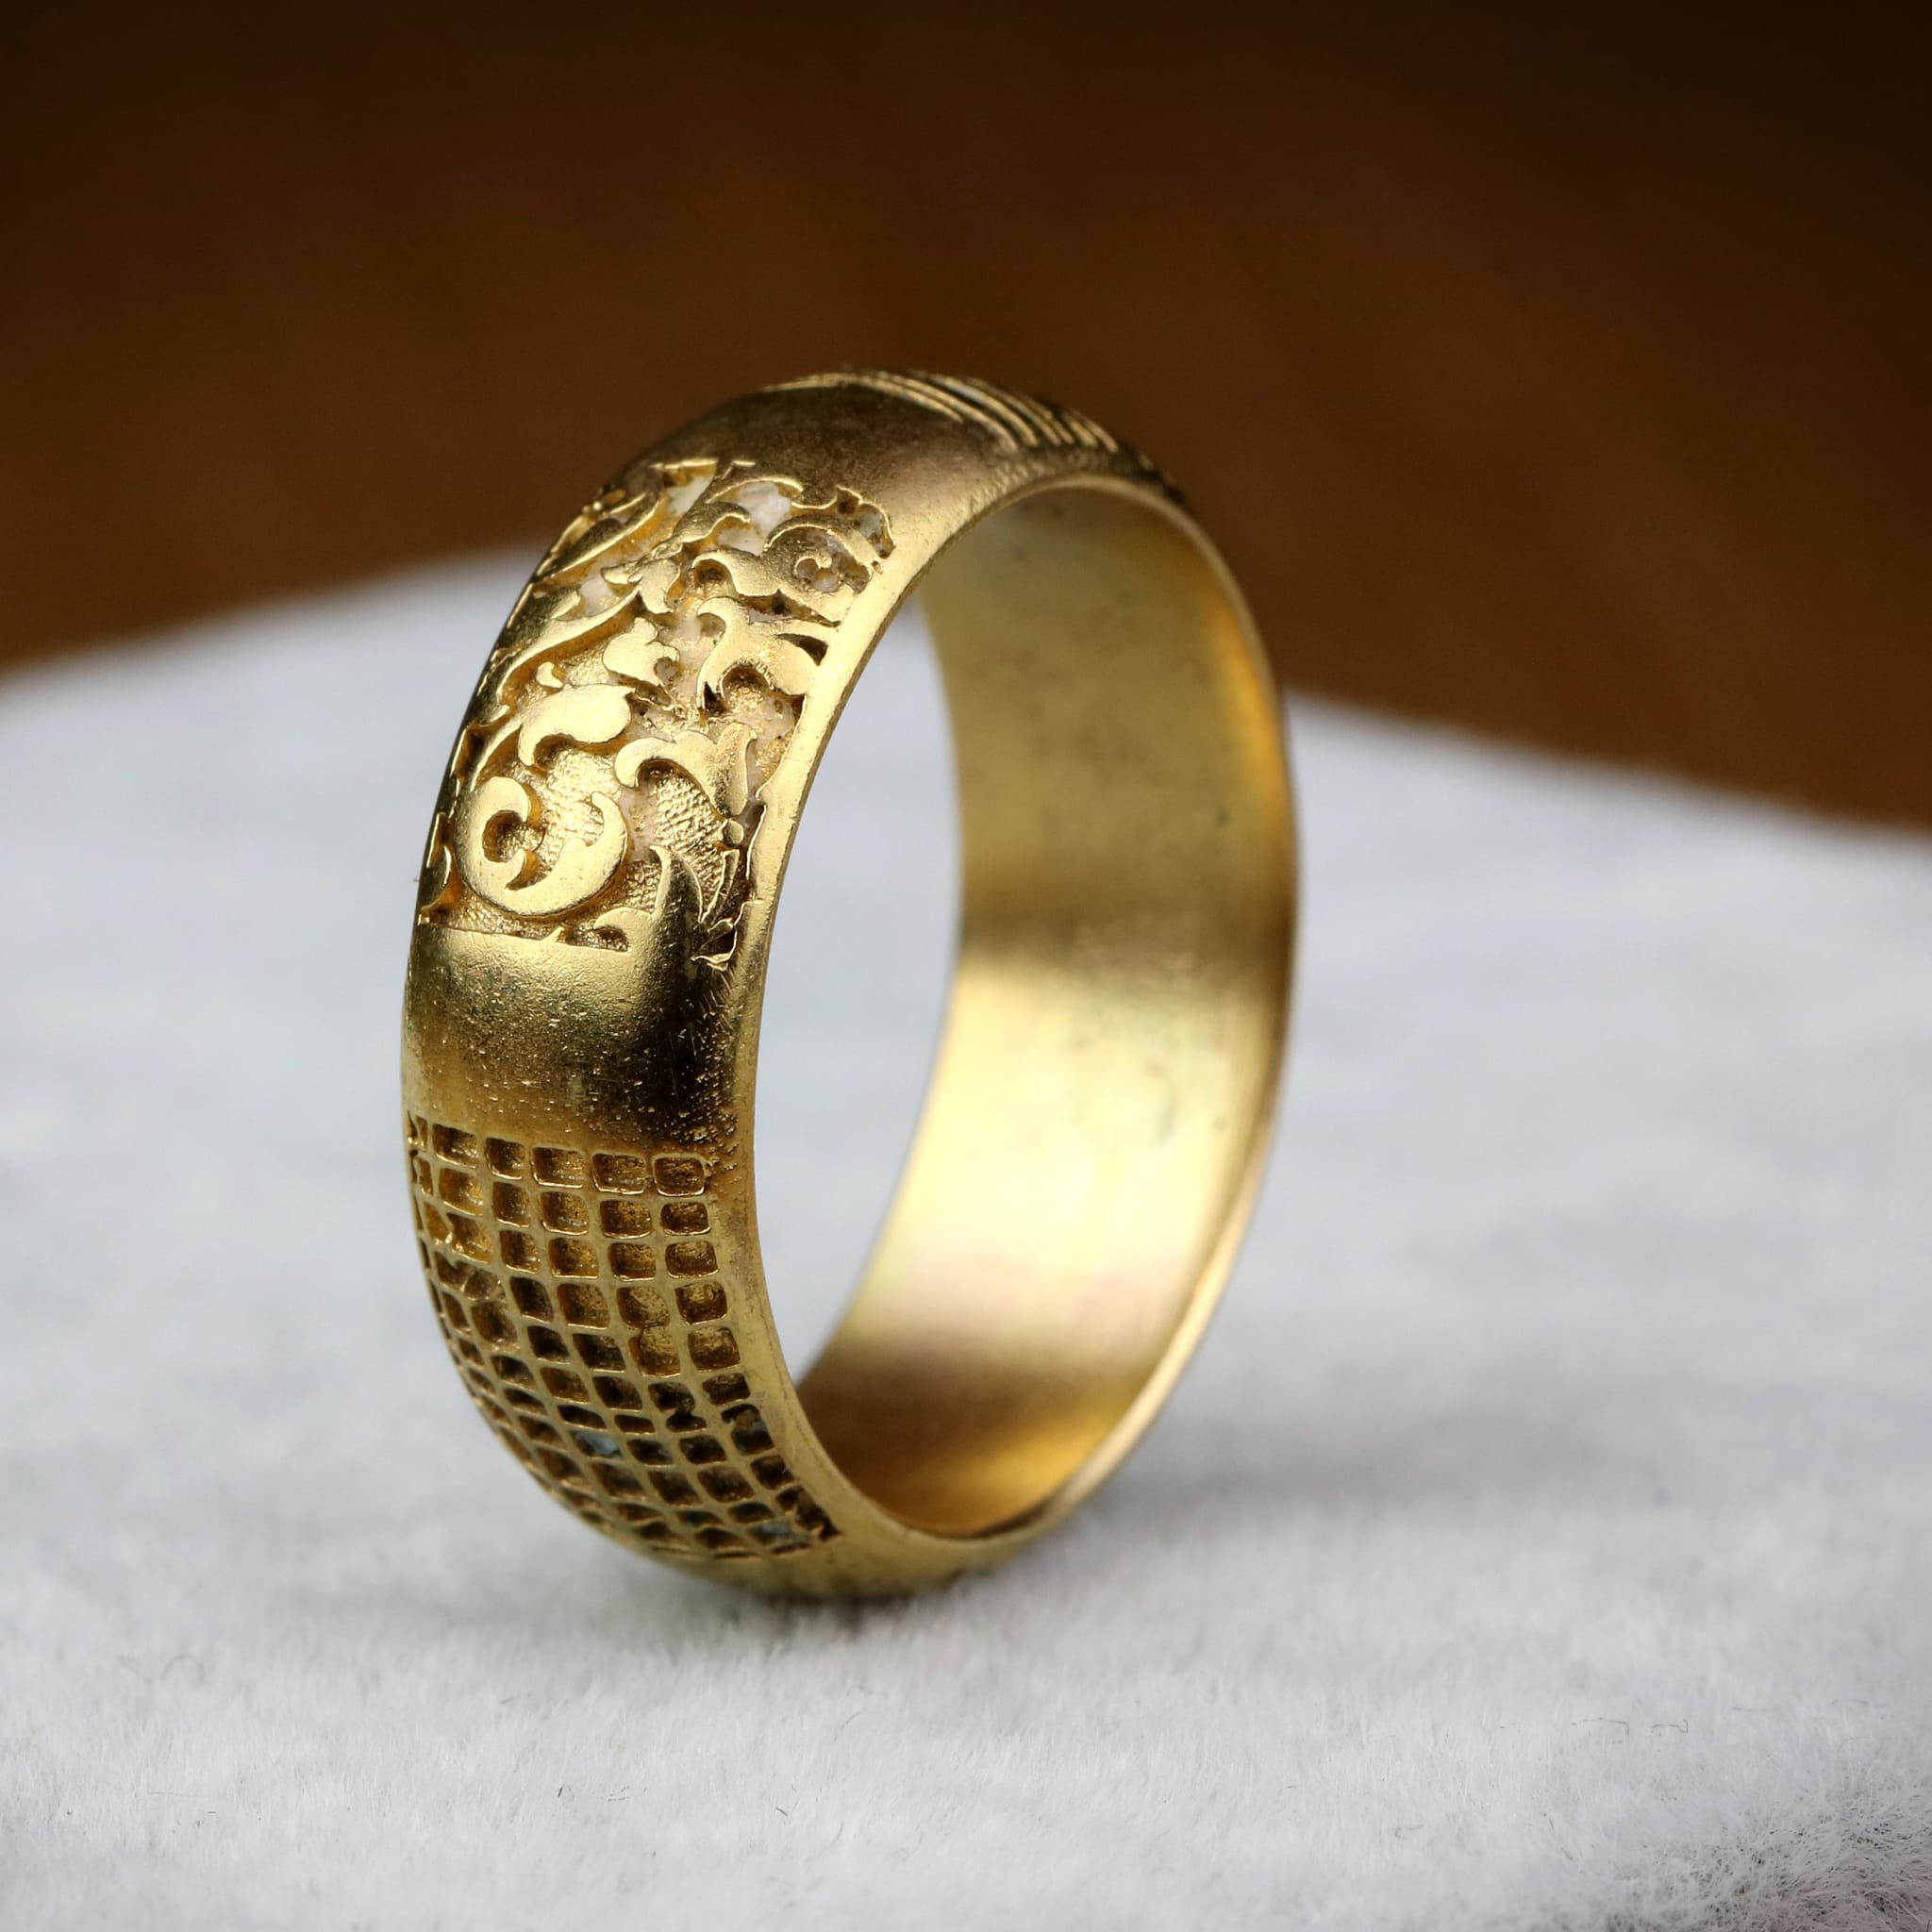 Detailed Gold Textured Ring Jewelry